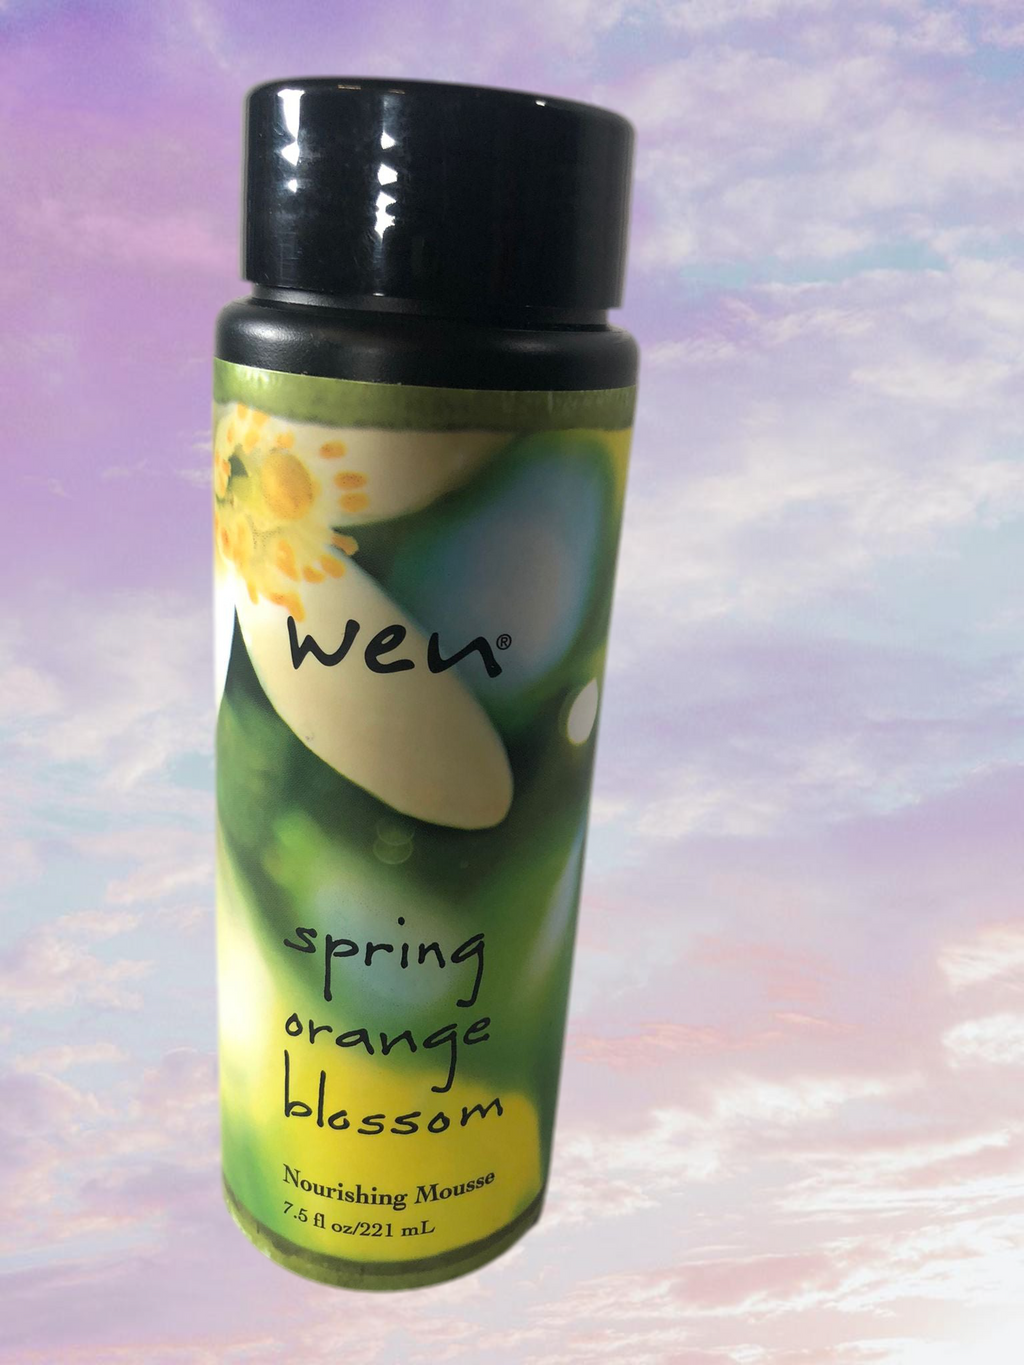 "As is" Wen By Chaz Dean Spring Orange Blossom Nourishing Mousse 7.5 oz - Without Pump